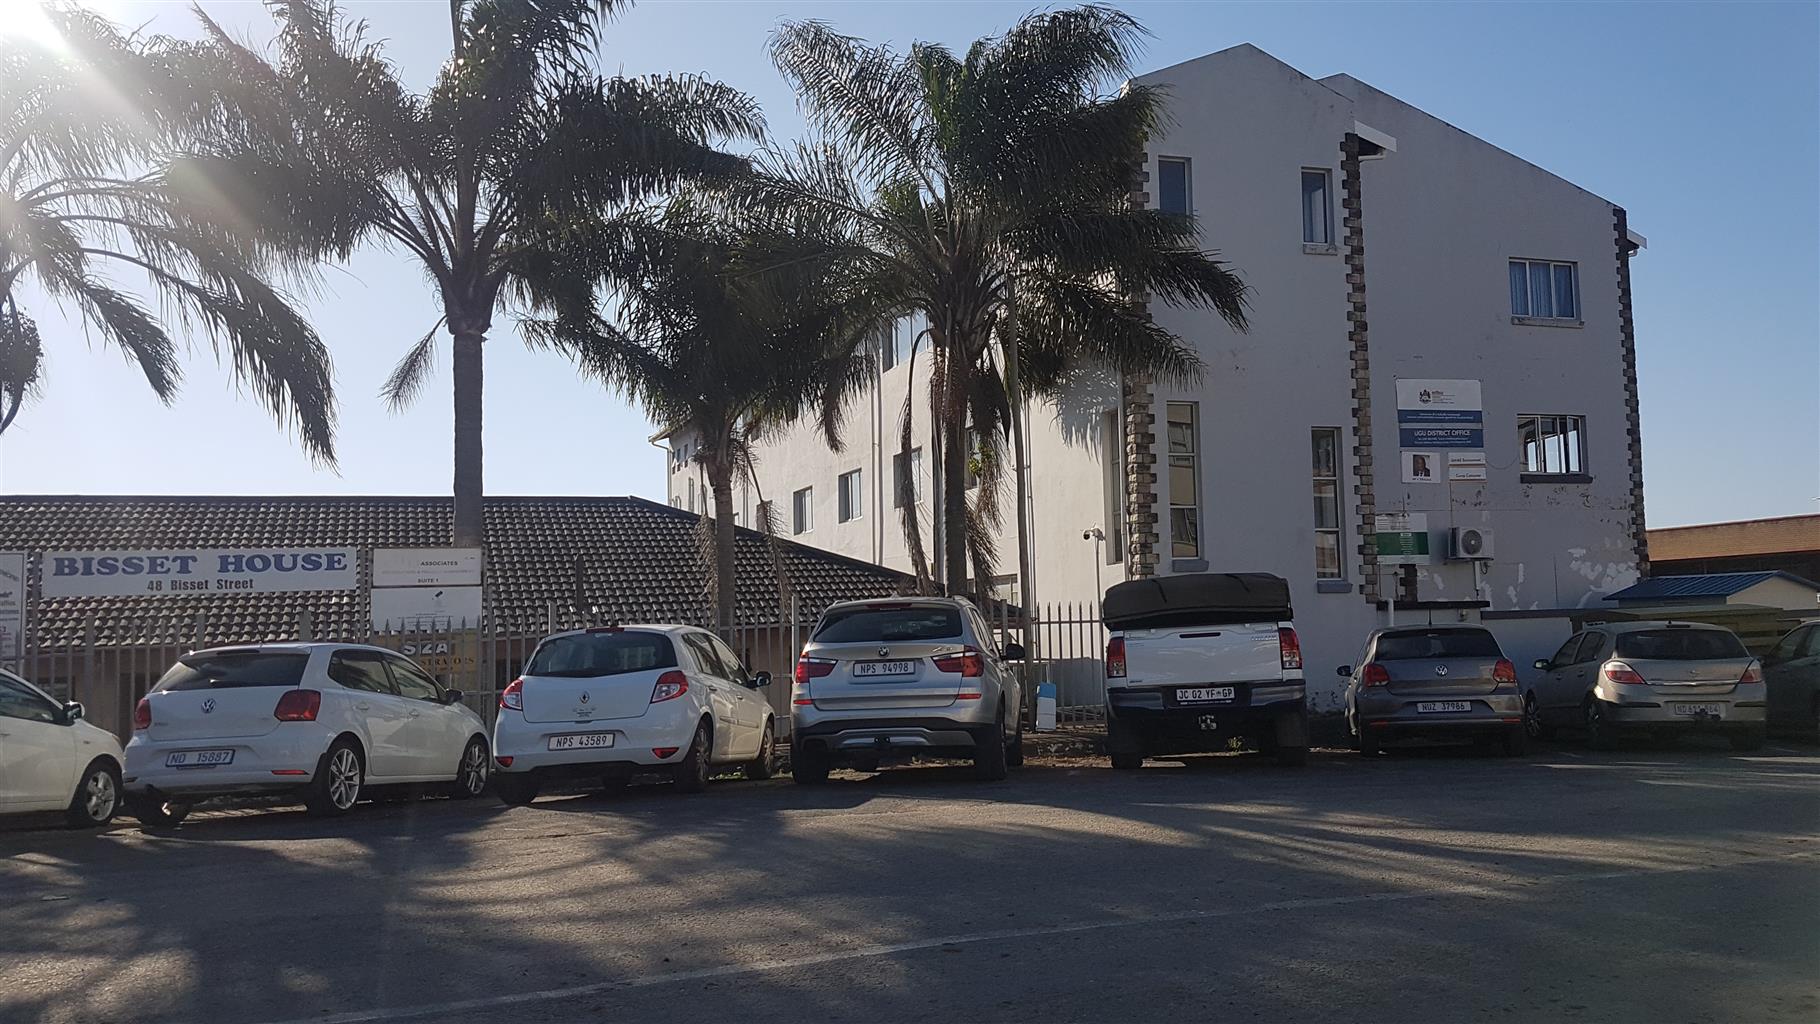 Sectional Title Office  in Port Shepstone CBD